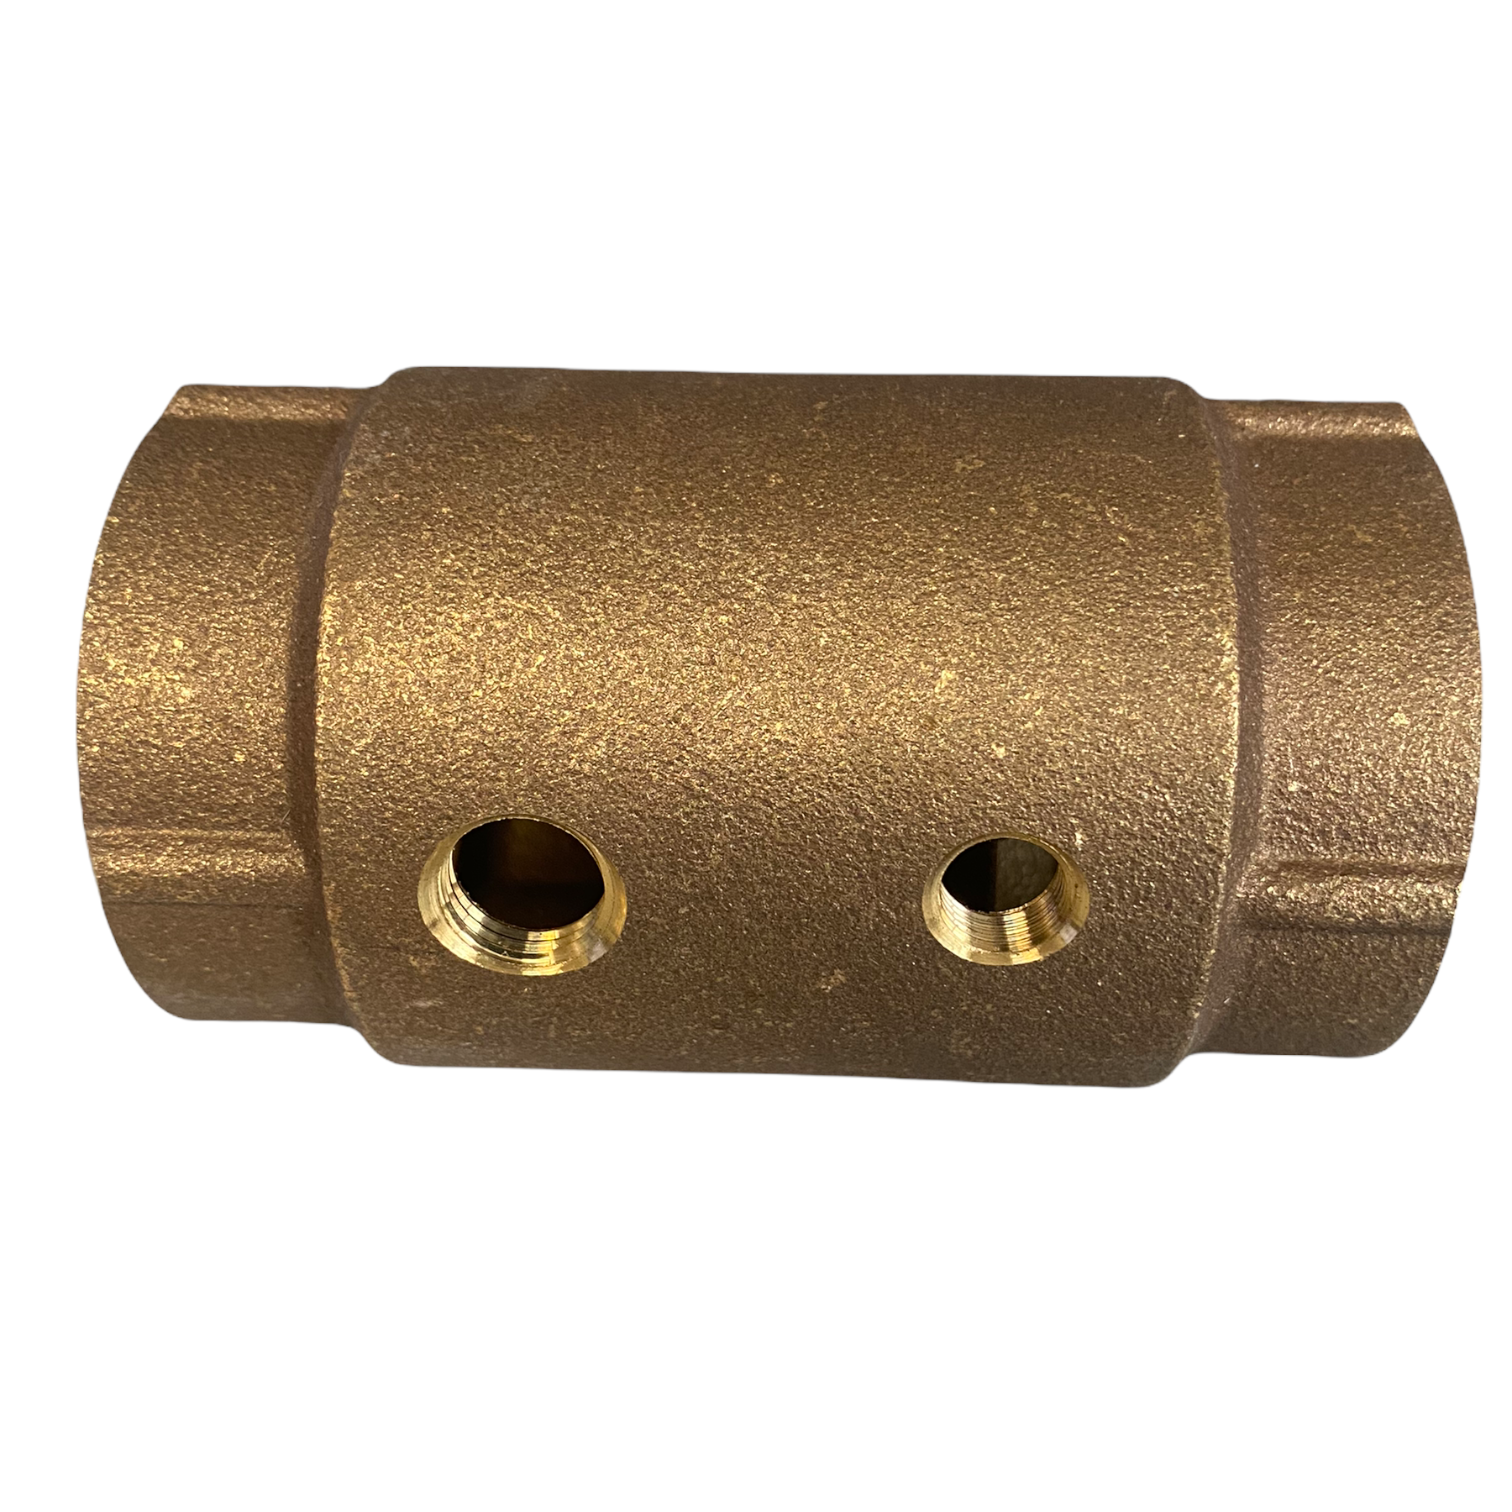 CVTNL1502BS - 1.5 inch 2BS-Series Lead Free Brass Double-Tap Check Valve